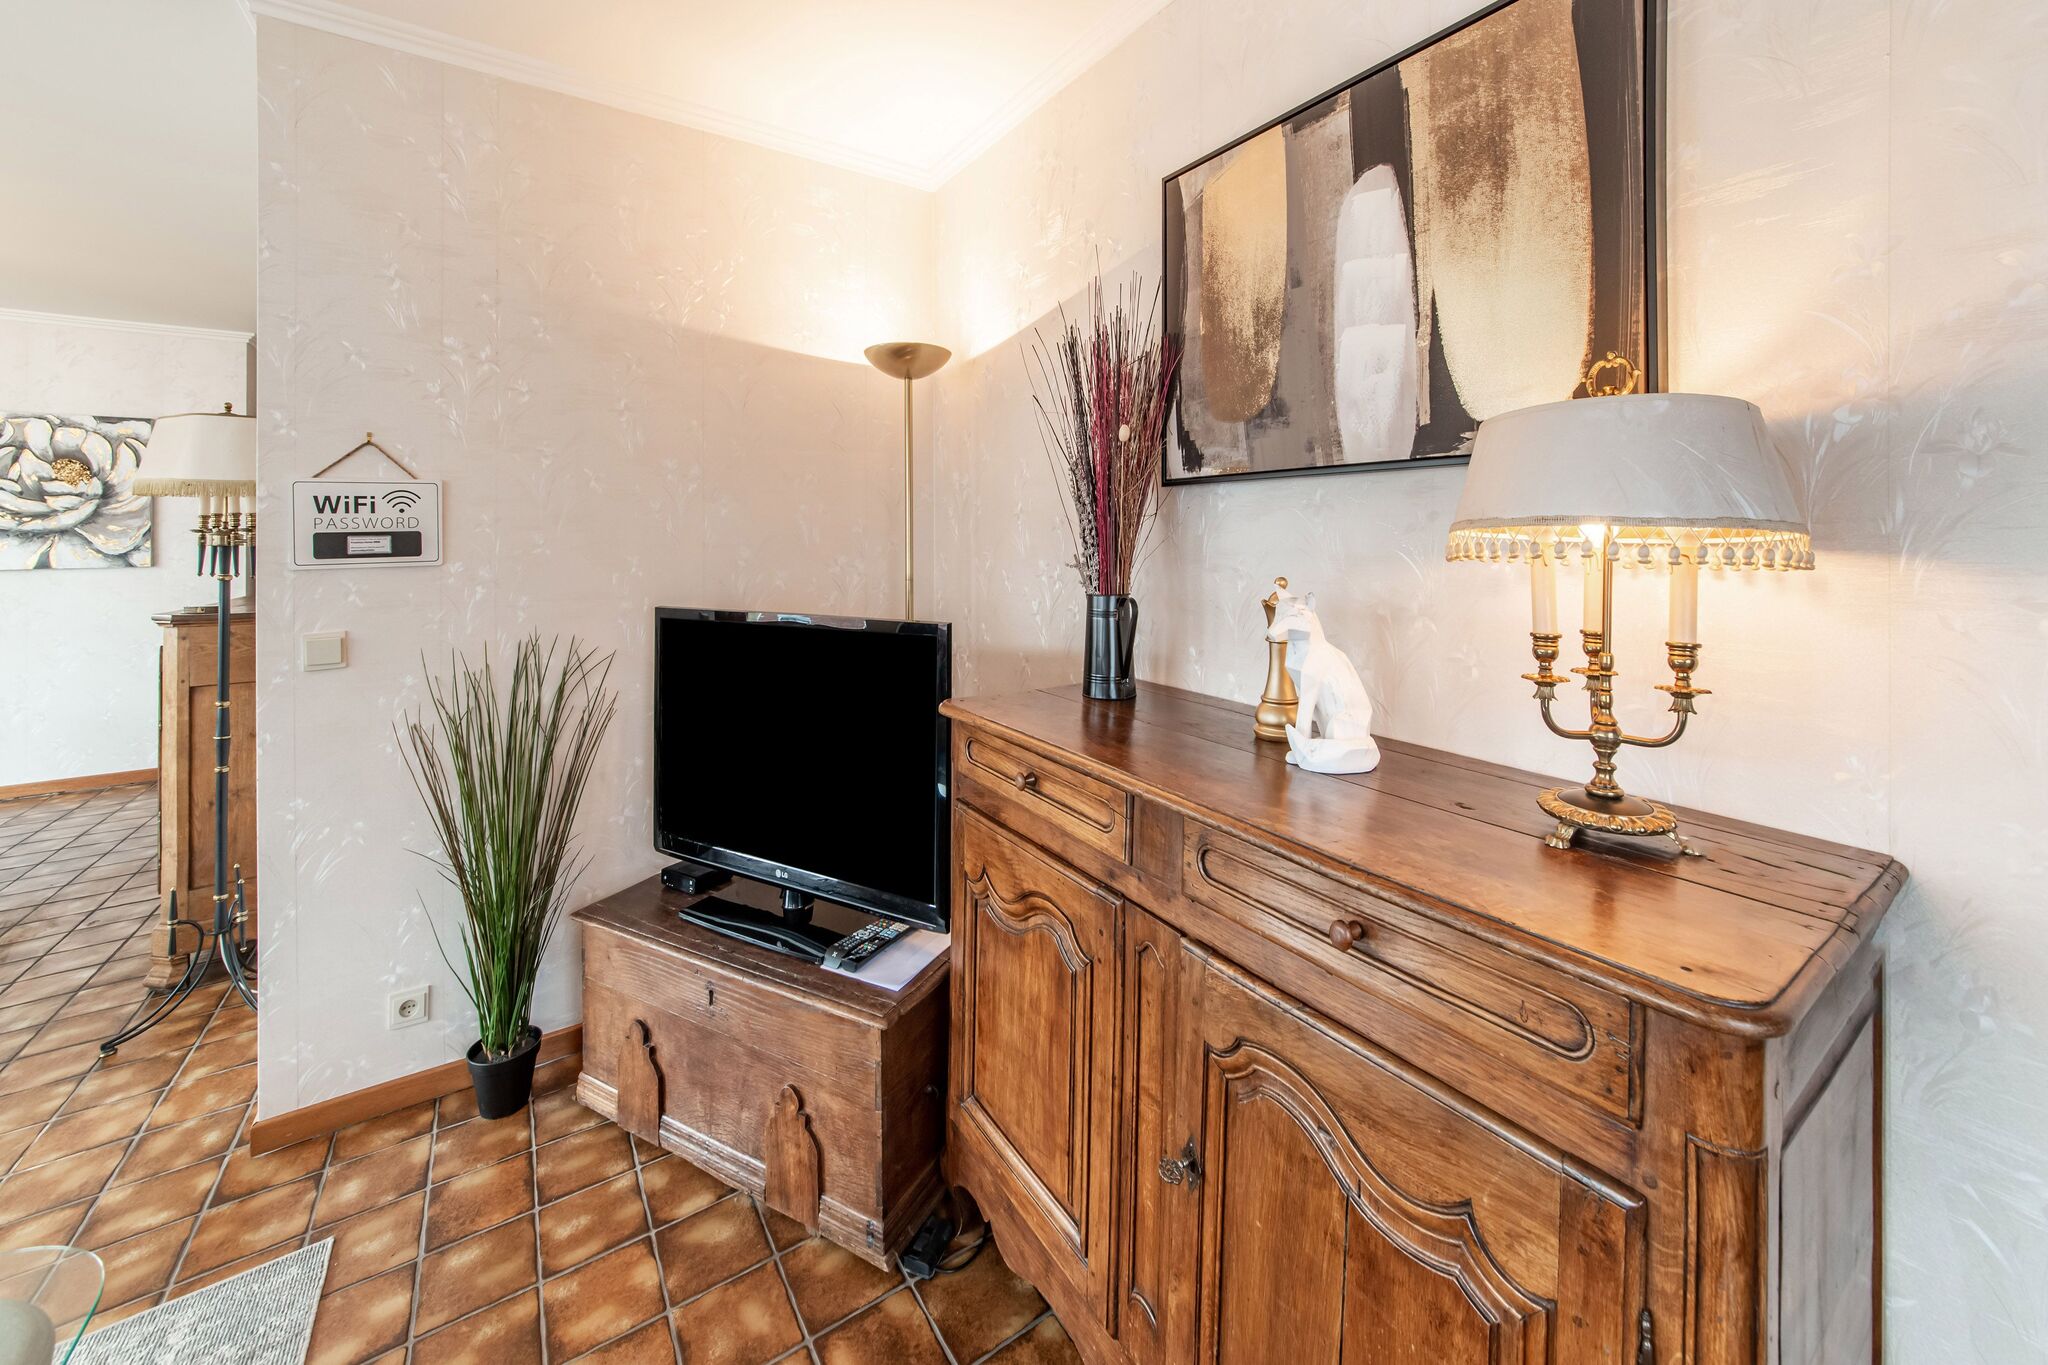 The Inseparable - beautiful apartment for 7 adults in Malmedy